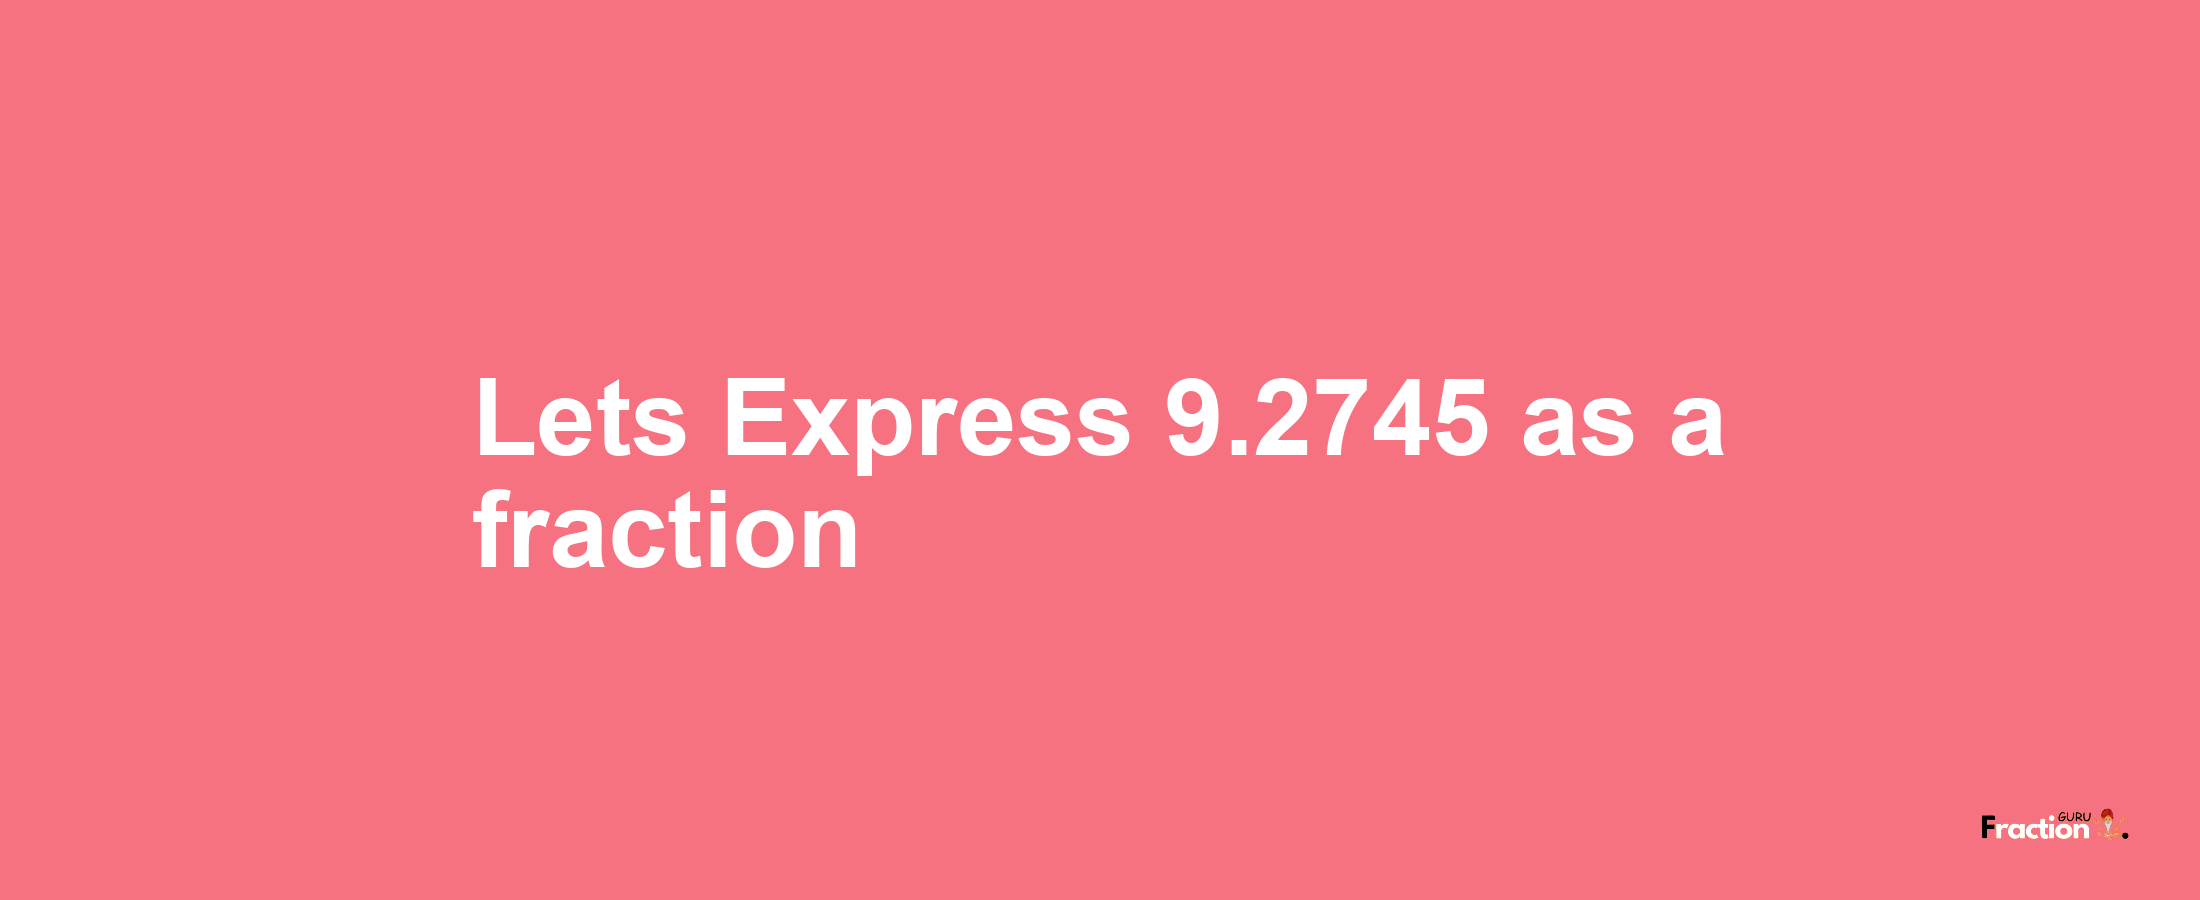 Lets Express 9.2745 as afraction